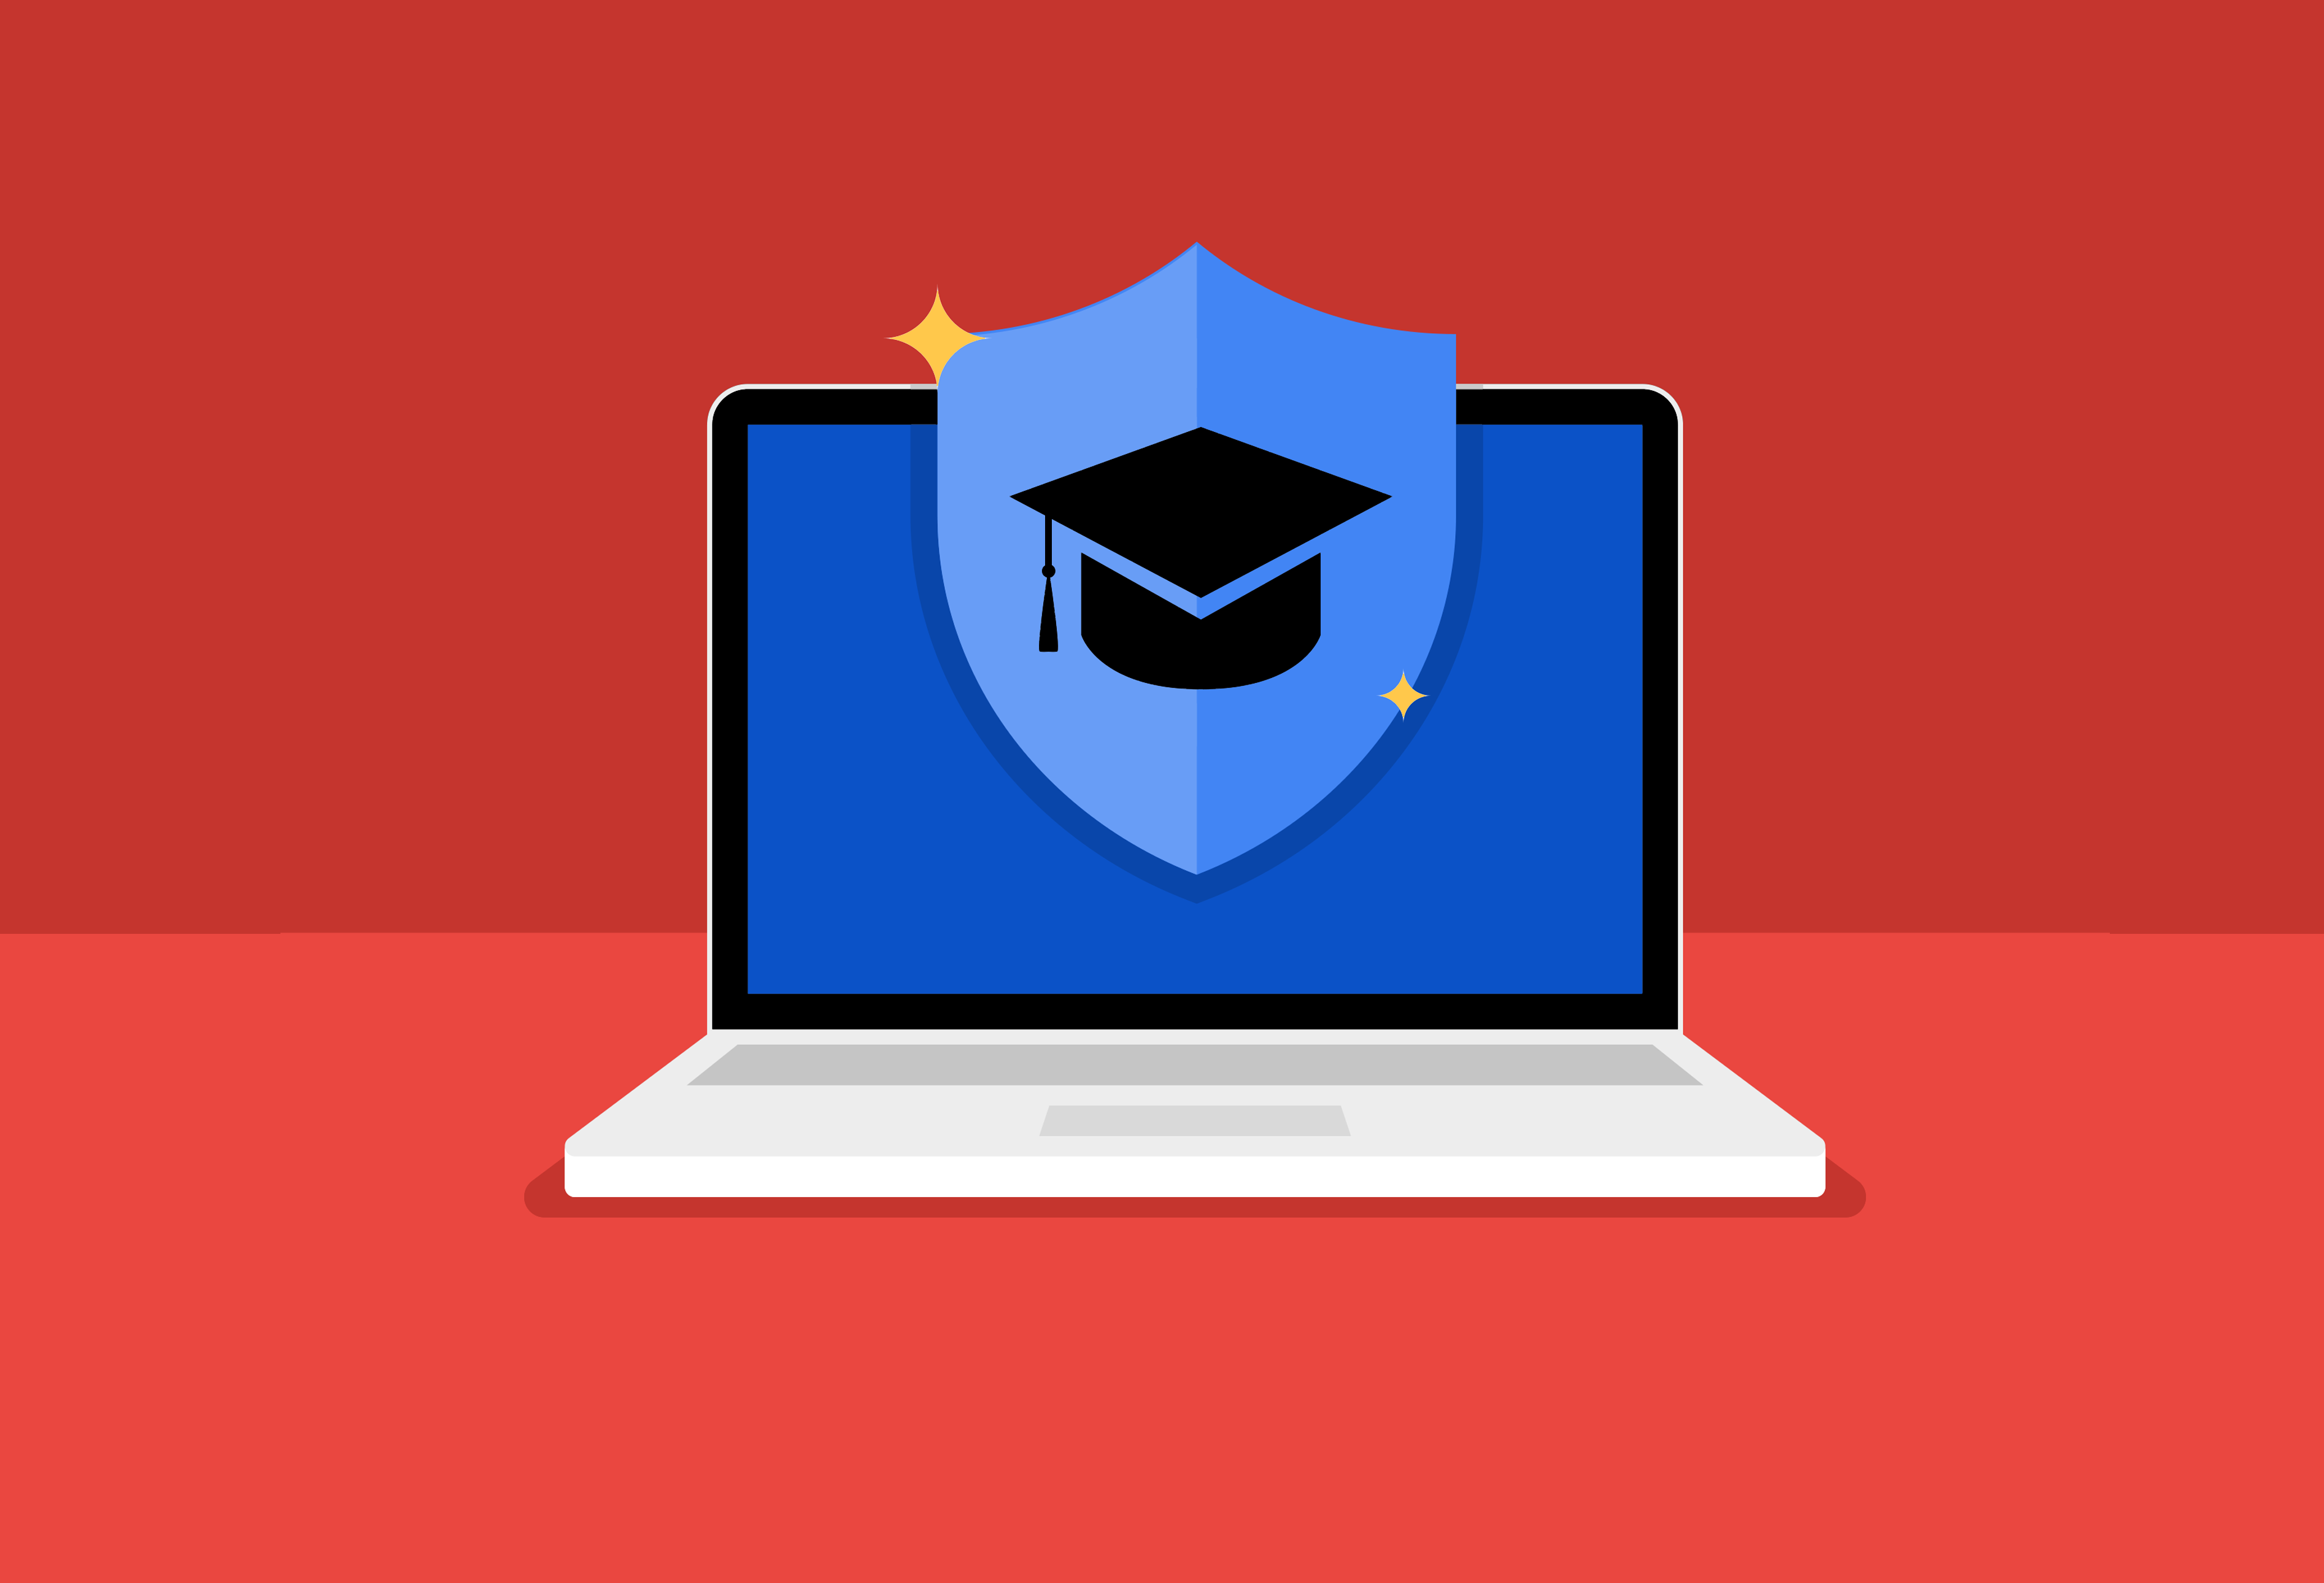 Three Things Policymakers Can Do to Protect Online Students